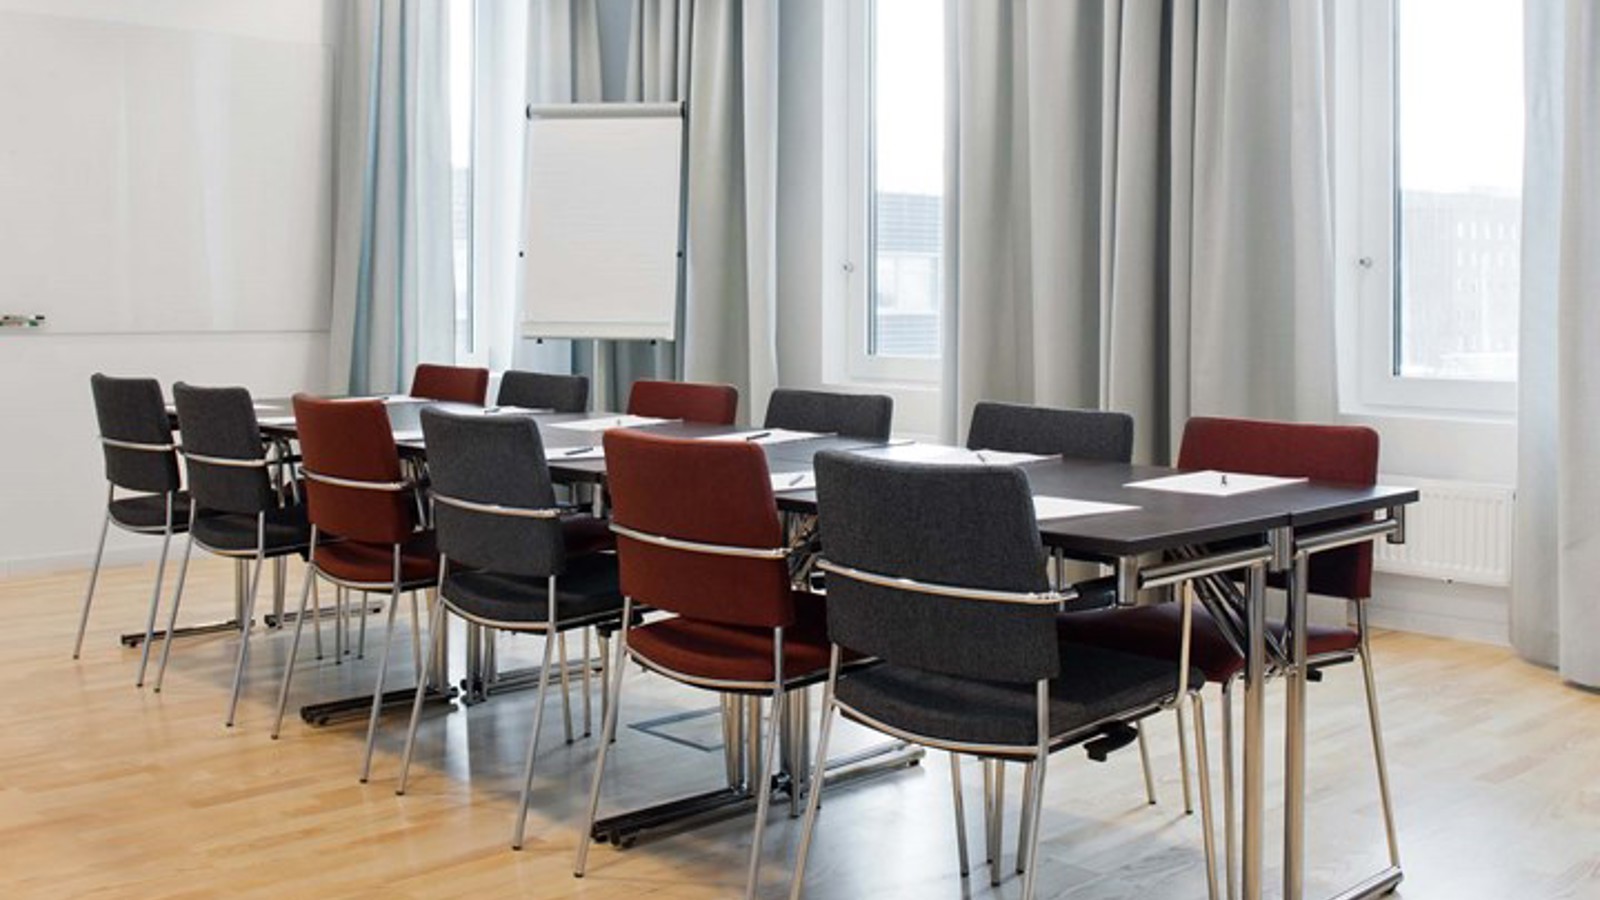 Conference room with board seating, large windows, gray curtains and dark chairs